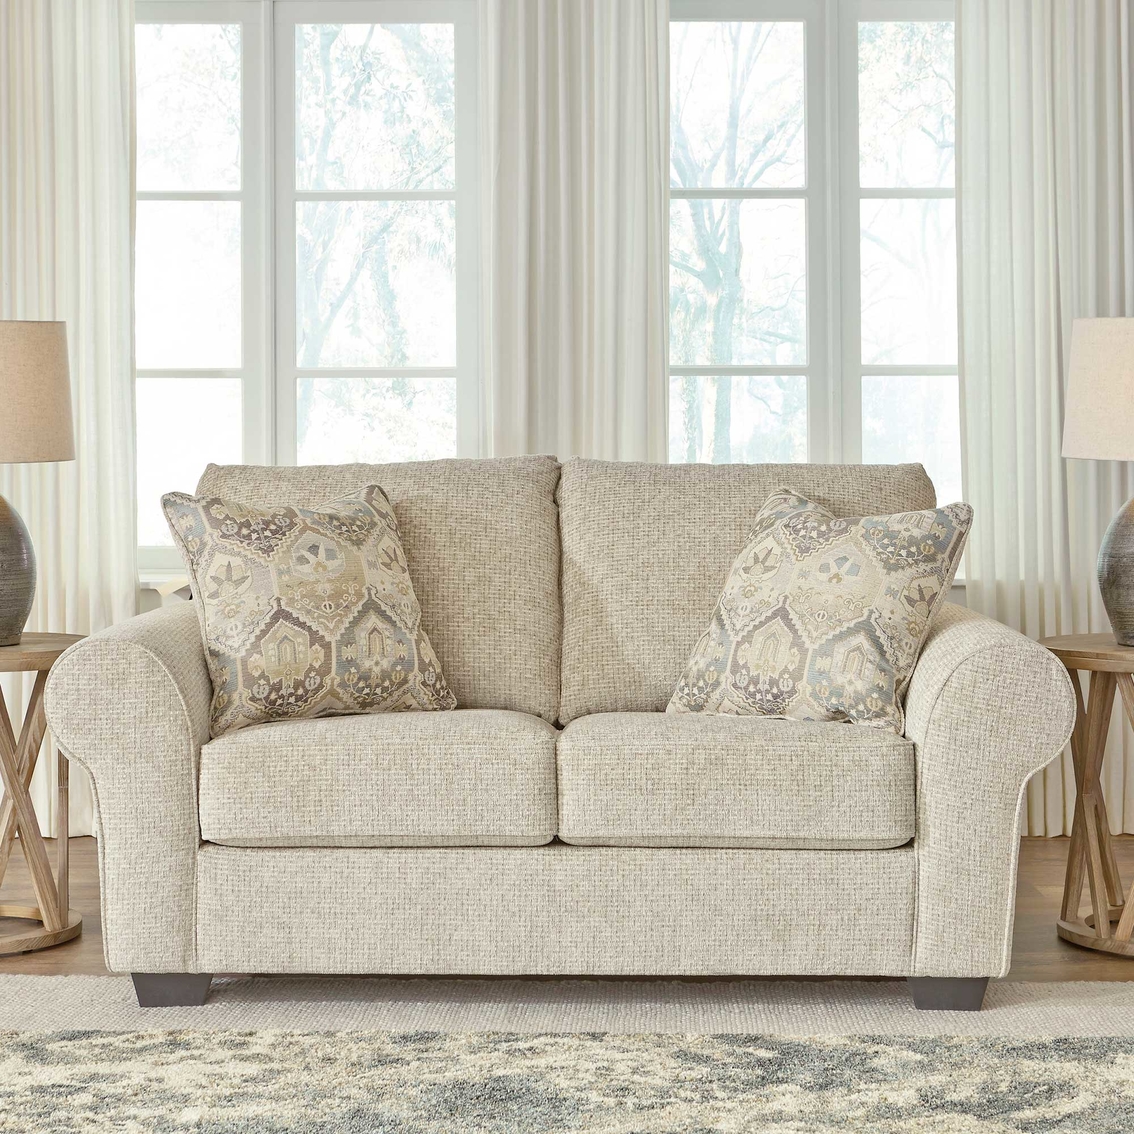 Signature Design By Ashley Haisley Loveseat | Sofas & Couches ...